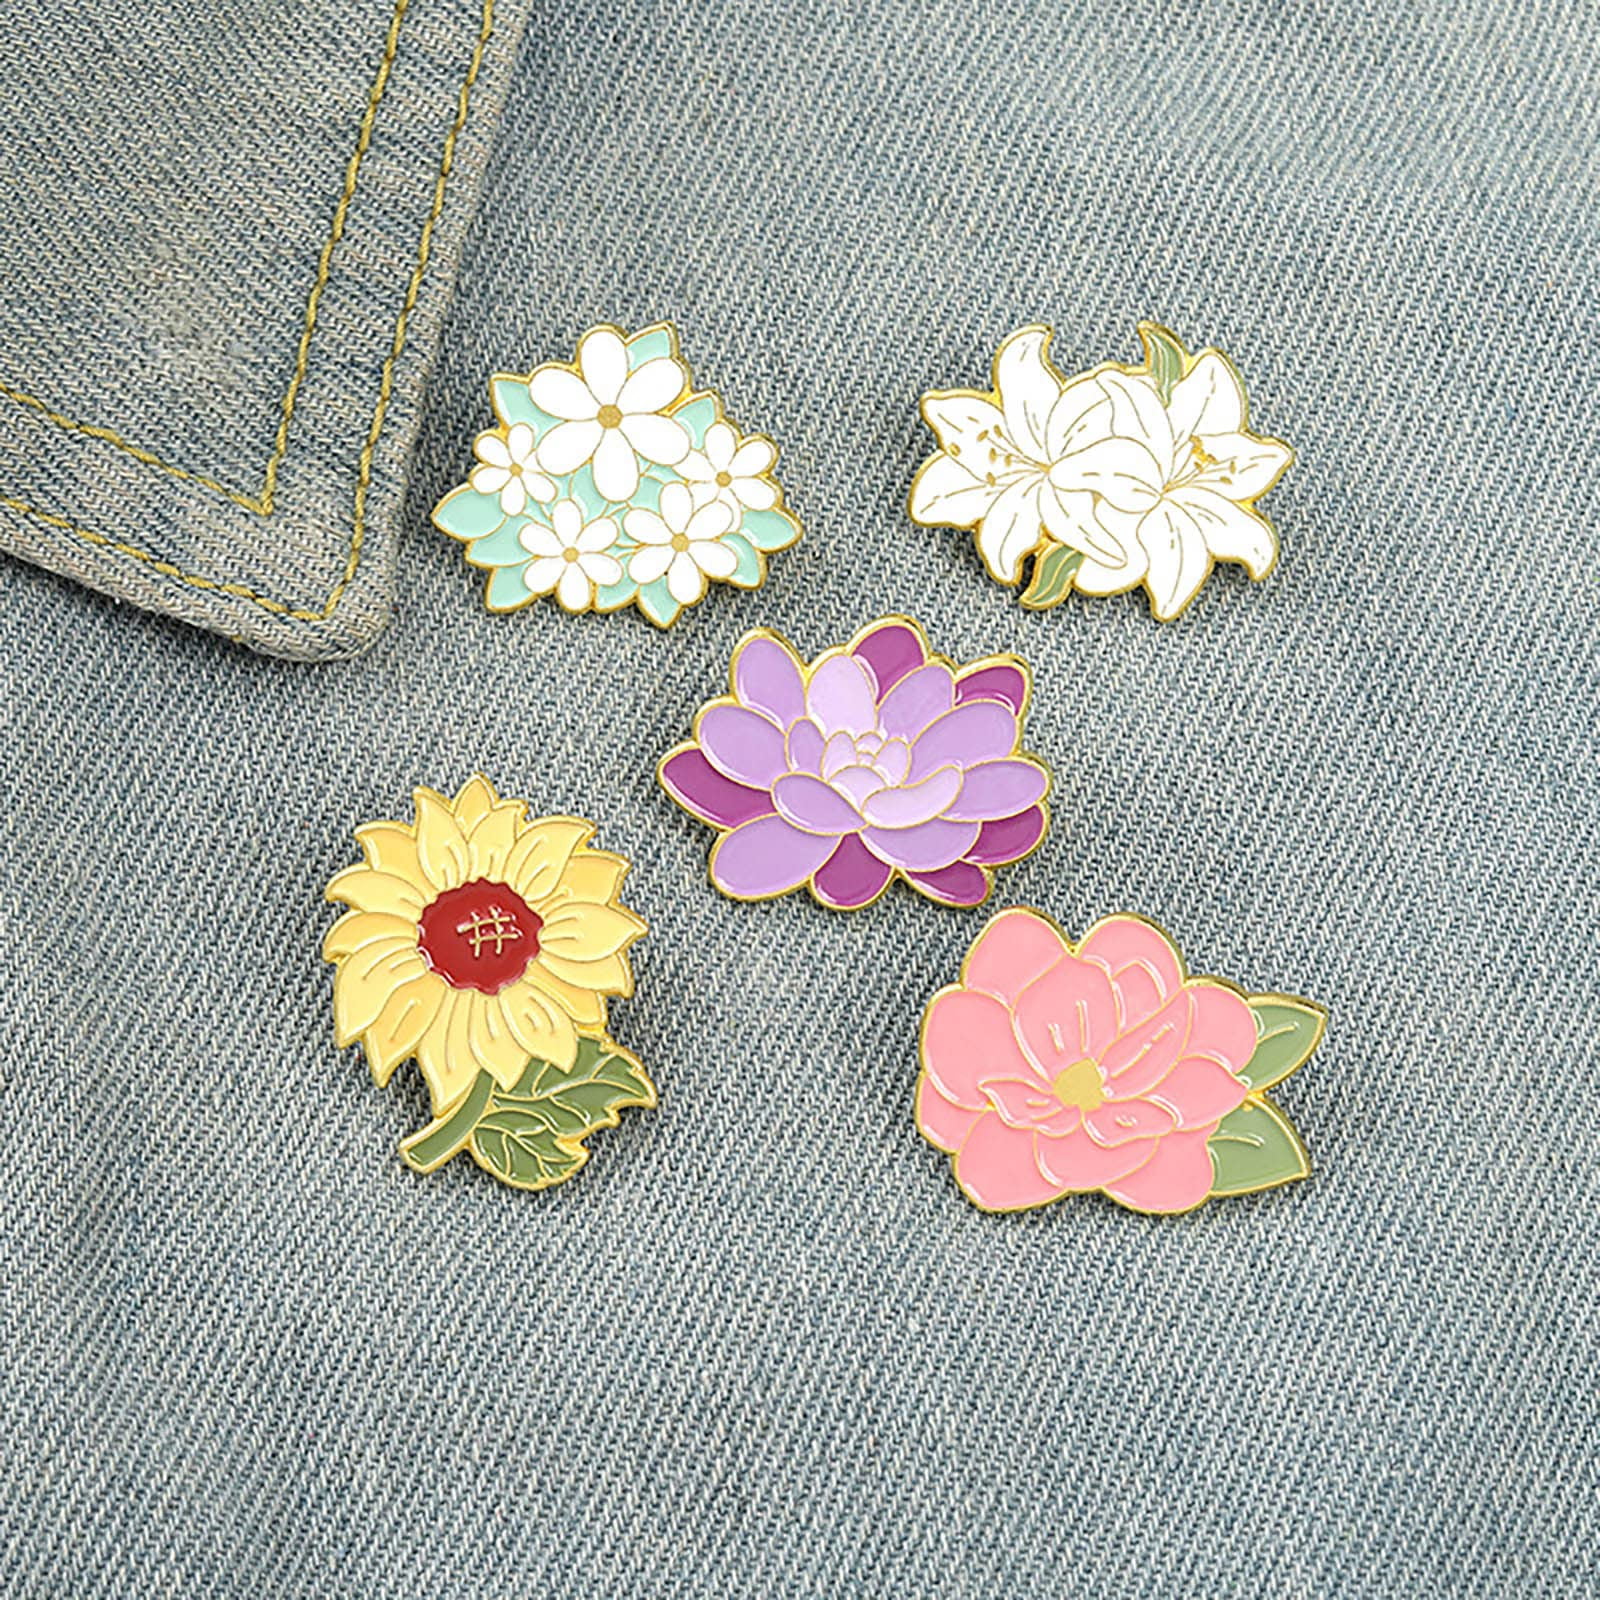 Lusofie 5pcs Flower Enamel Pins Aesthetic Flowers Pins Cute Backpacks Brooches Pins for Women Girls Clothing Bags Hats